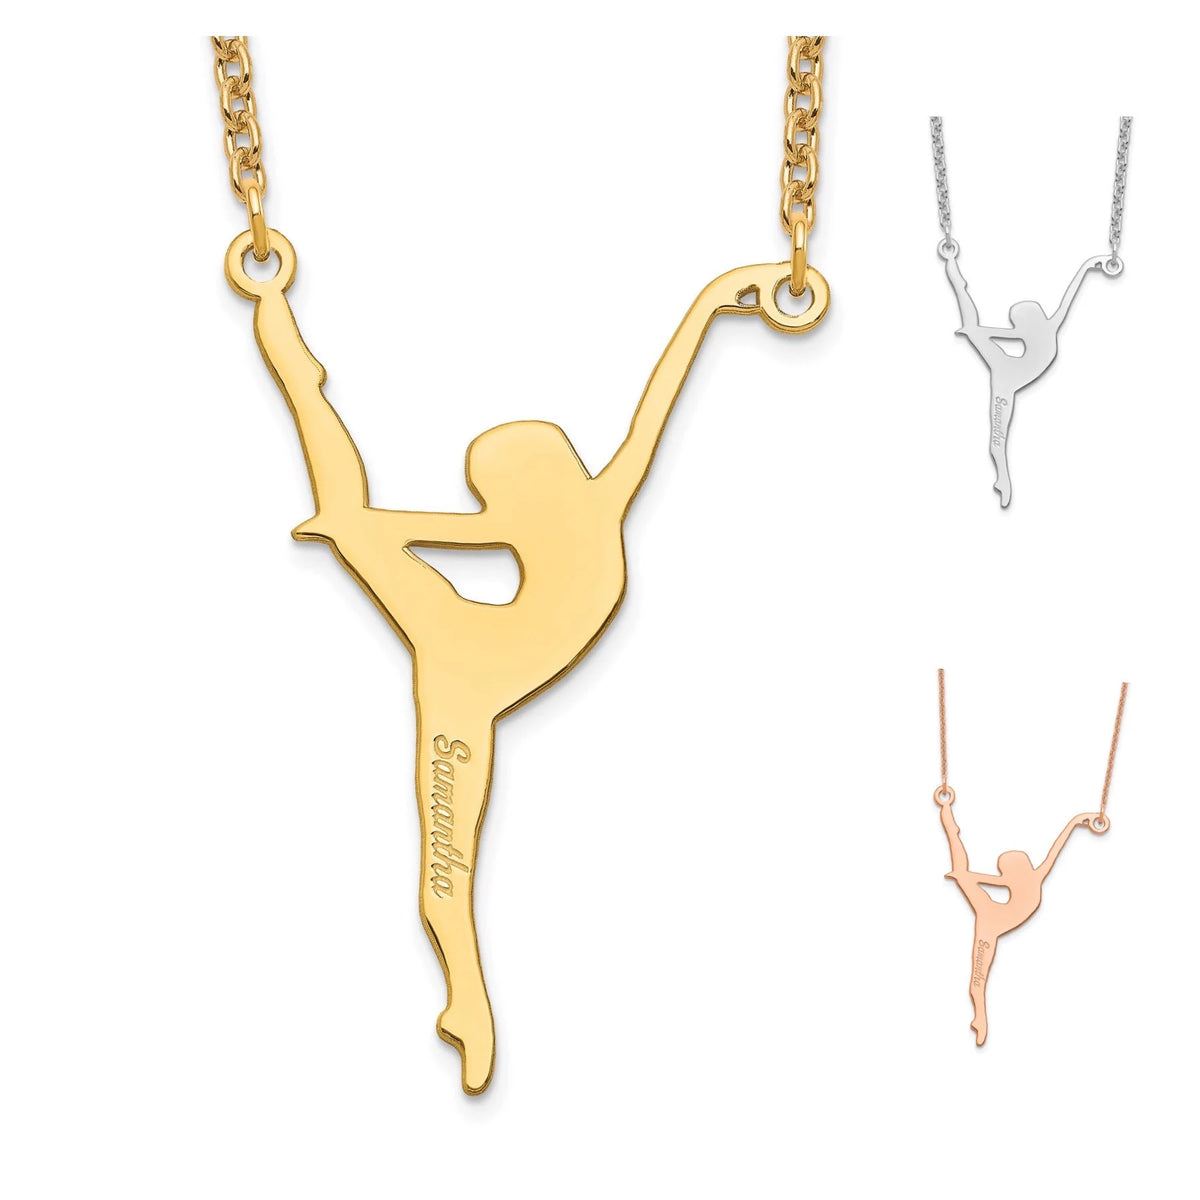 Personalized Ballet Name Necklace in Sterling Silver, 10k, or 14k Gold Chain Length 16, 18, & 20 Inches (1.5 inches Tall) Dancer Necklace